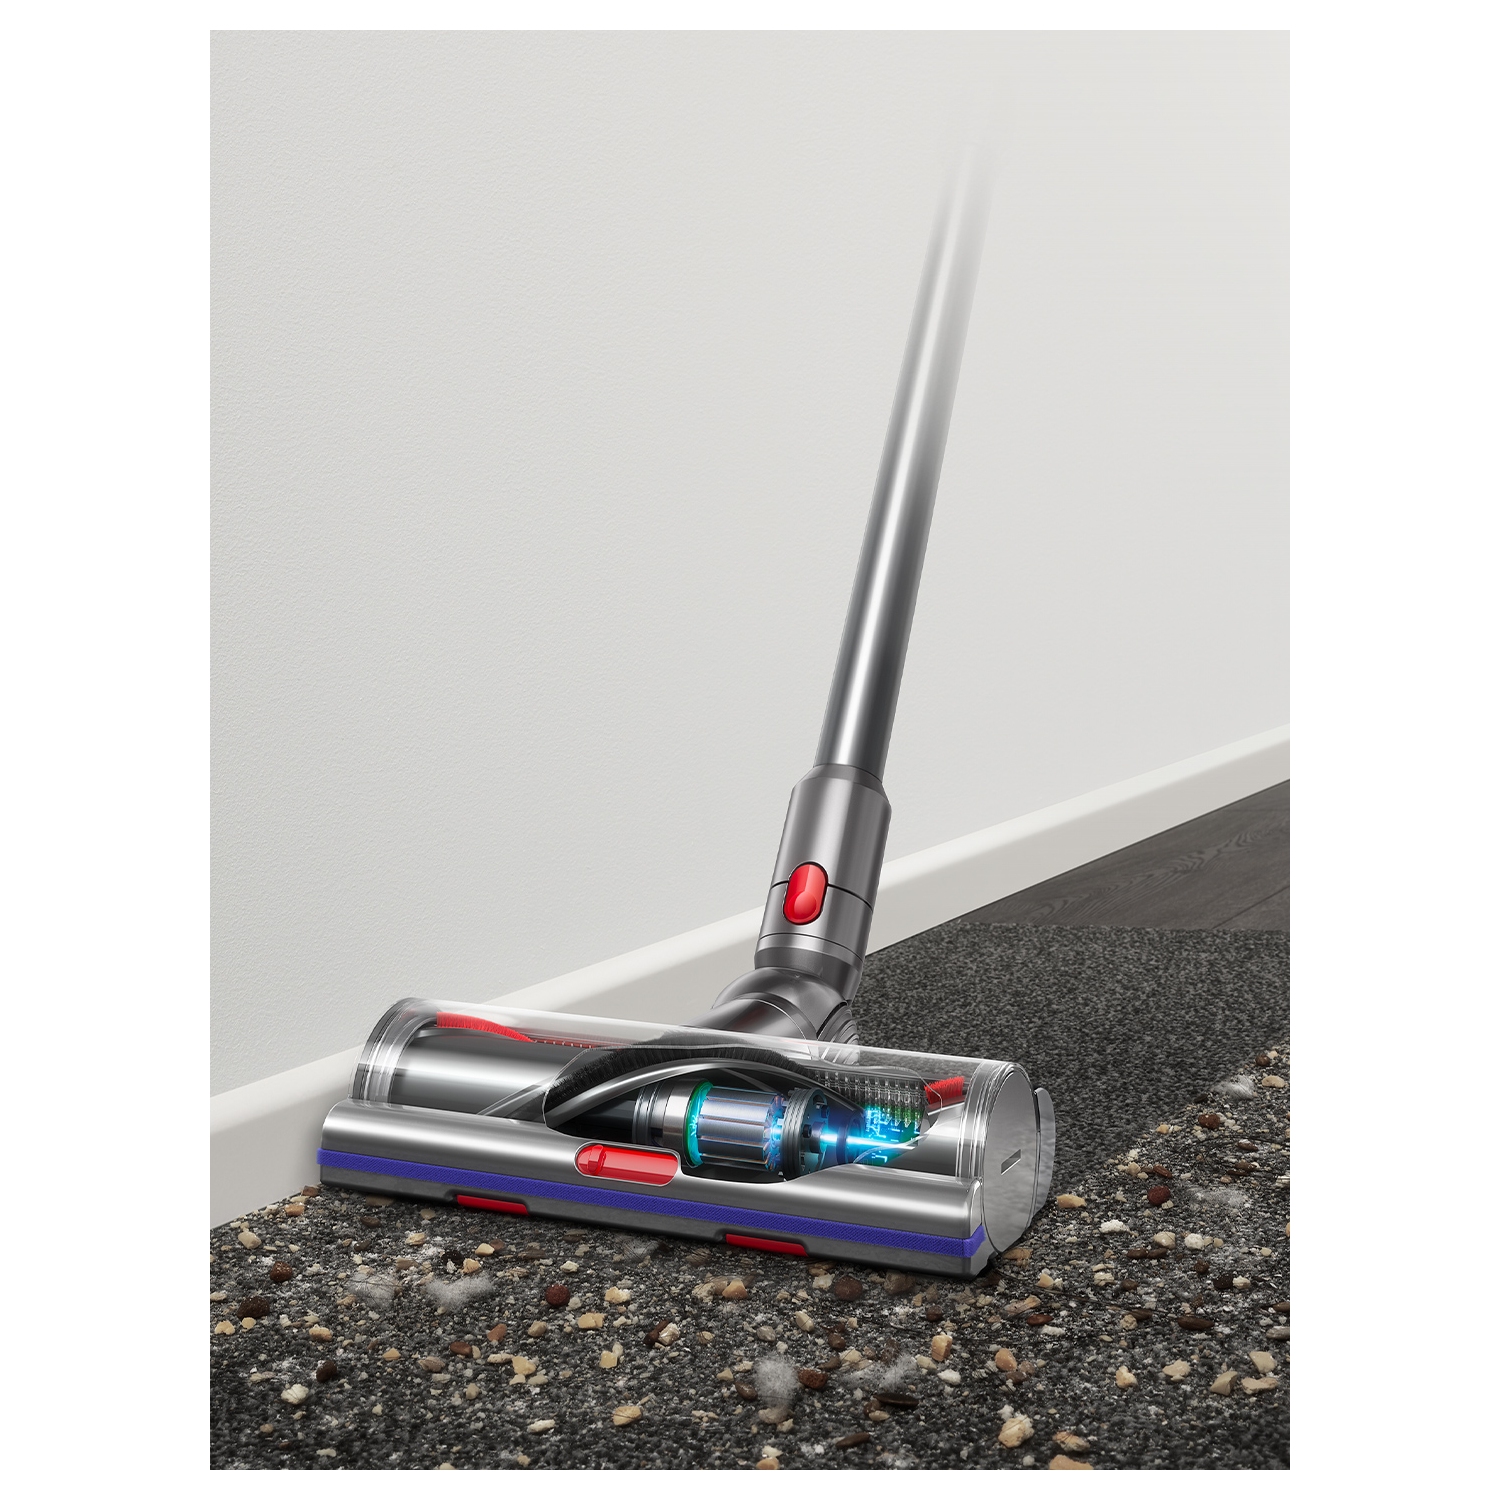 Dyson V15 Detect Animal Cordless Stick Cleaner - 60 Minutes Run Time - 5